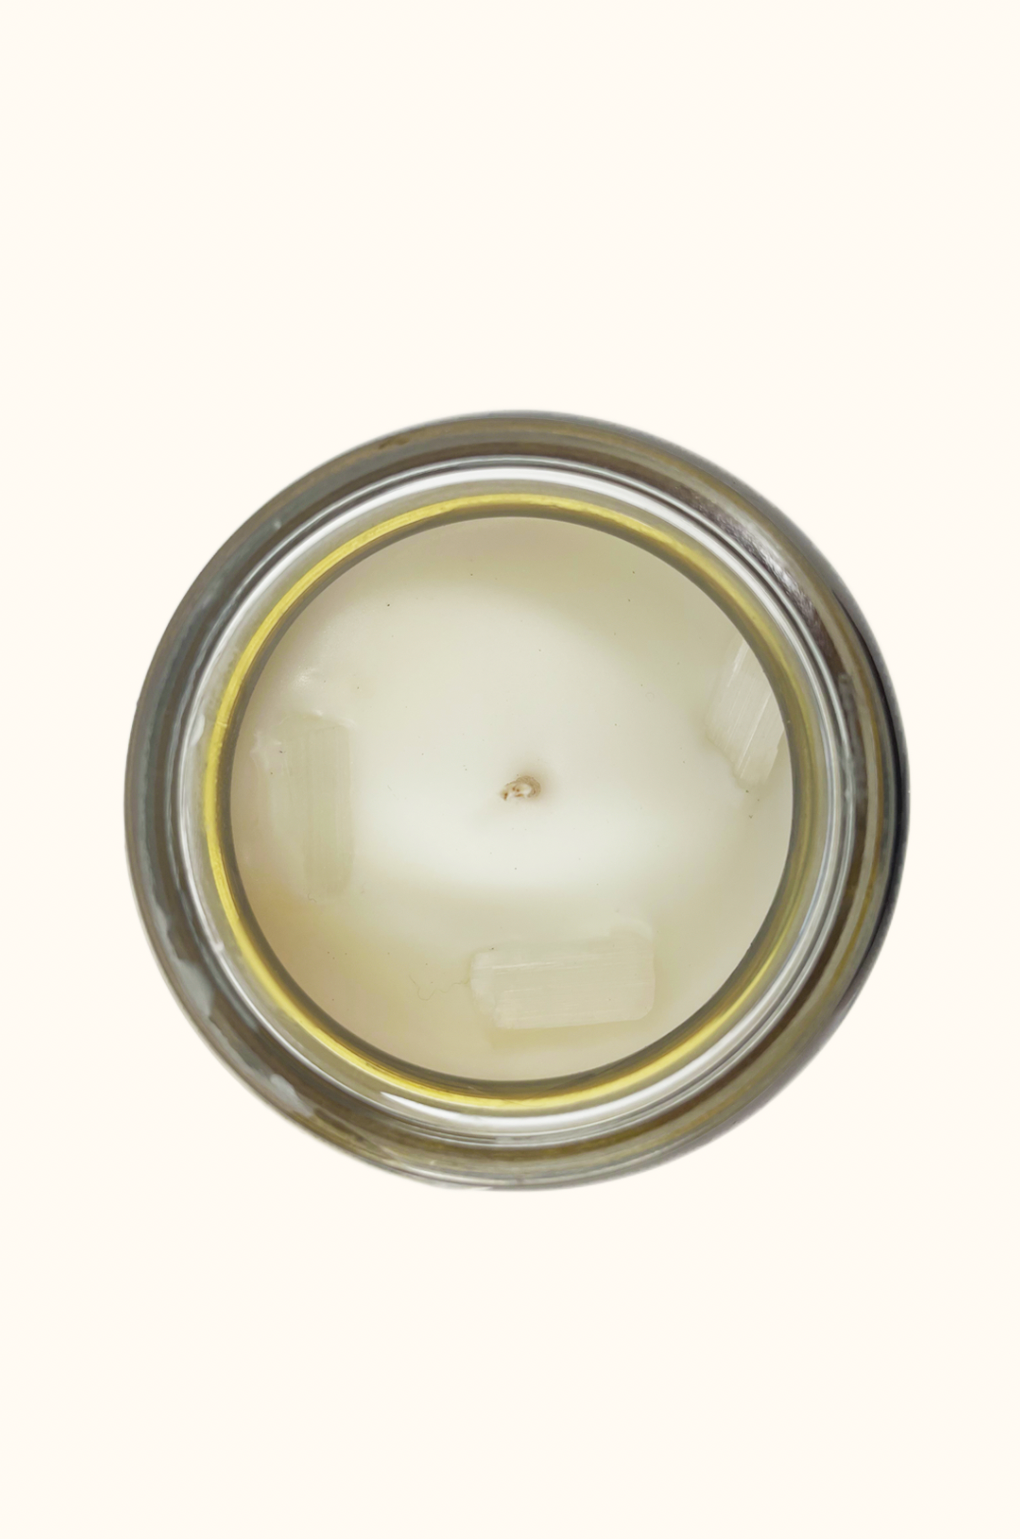 Energy Cleansing Crystal Infused Candle